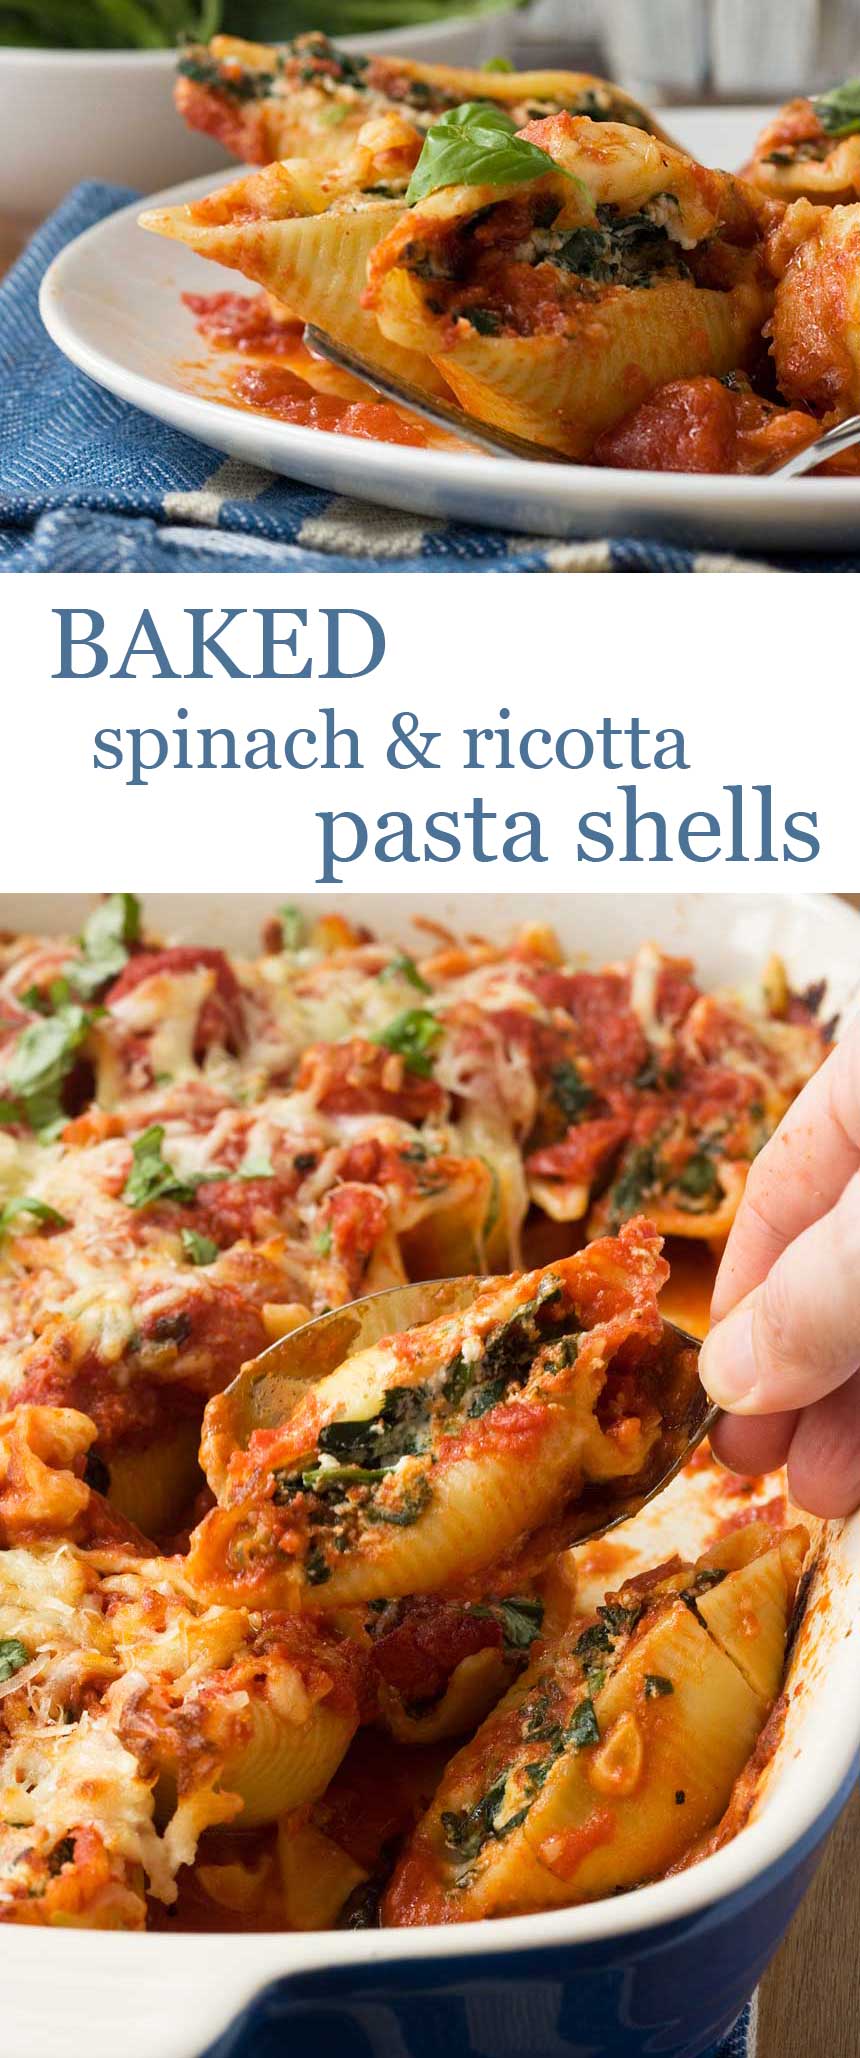 Someone spooning Baked spinach and ricotta pasta shells out of a blue baking dish with a title on it for Pinterest.